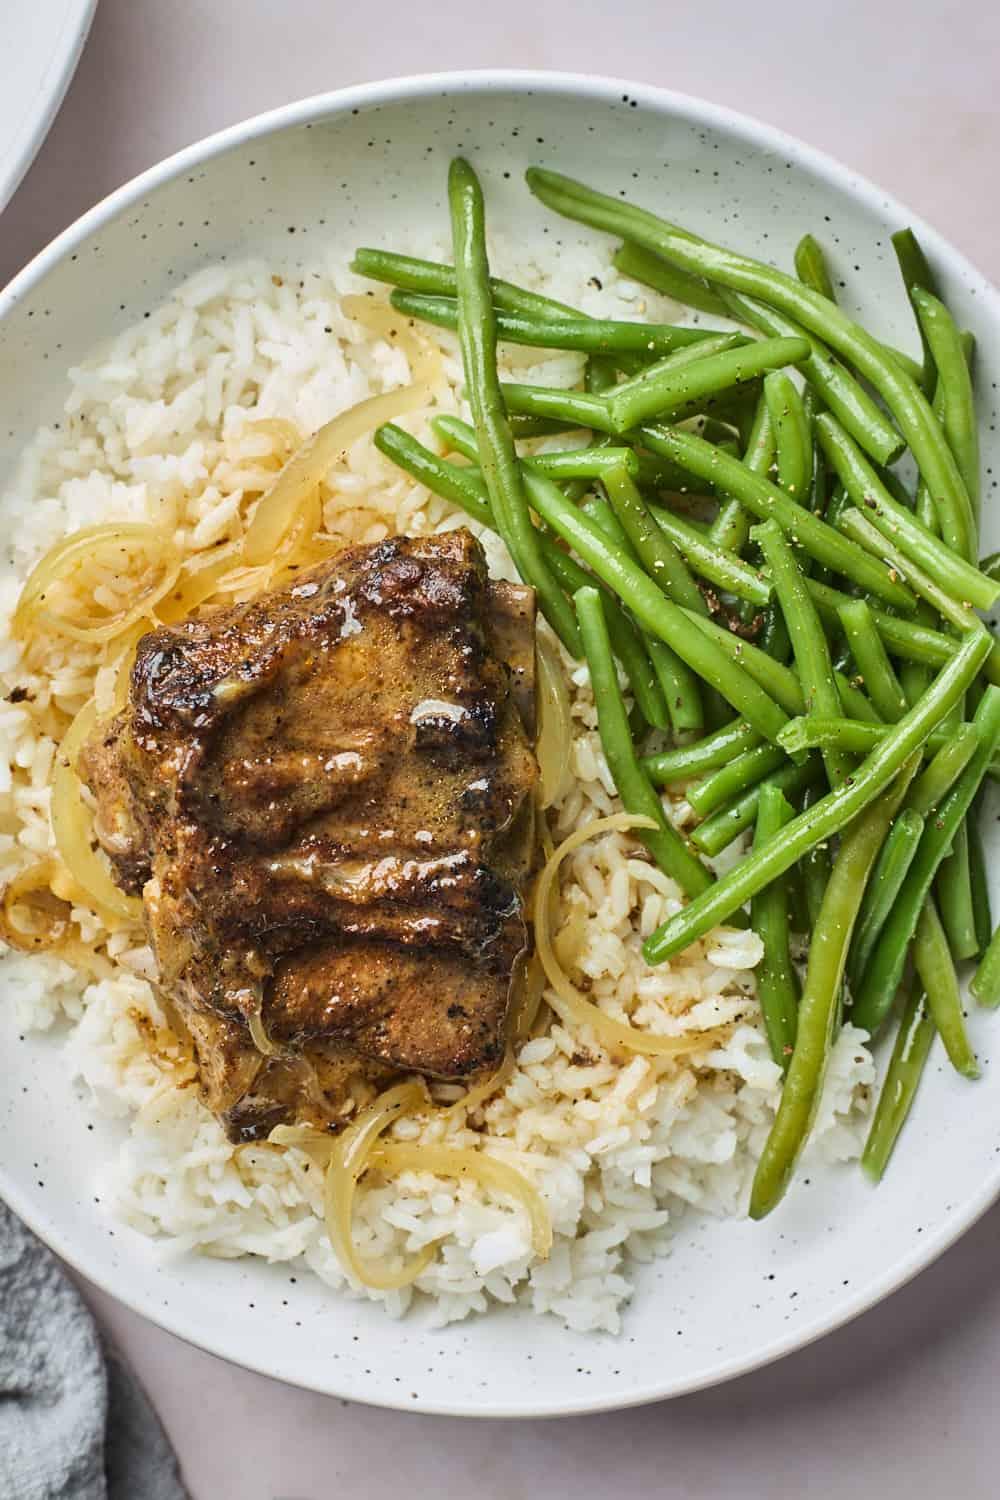 Roasted pork neck bones over rice next to green beans on a plate.